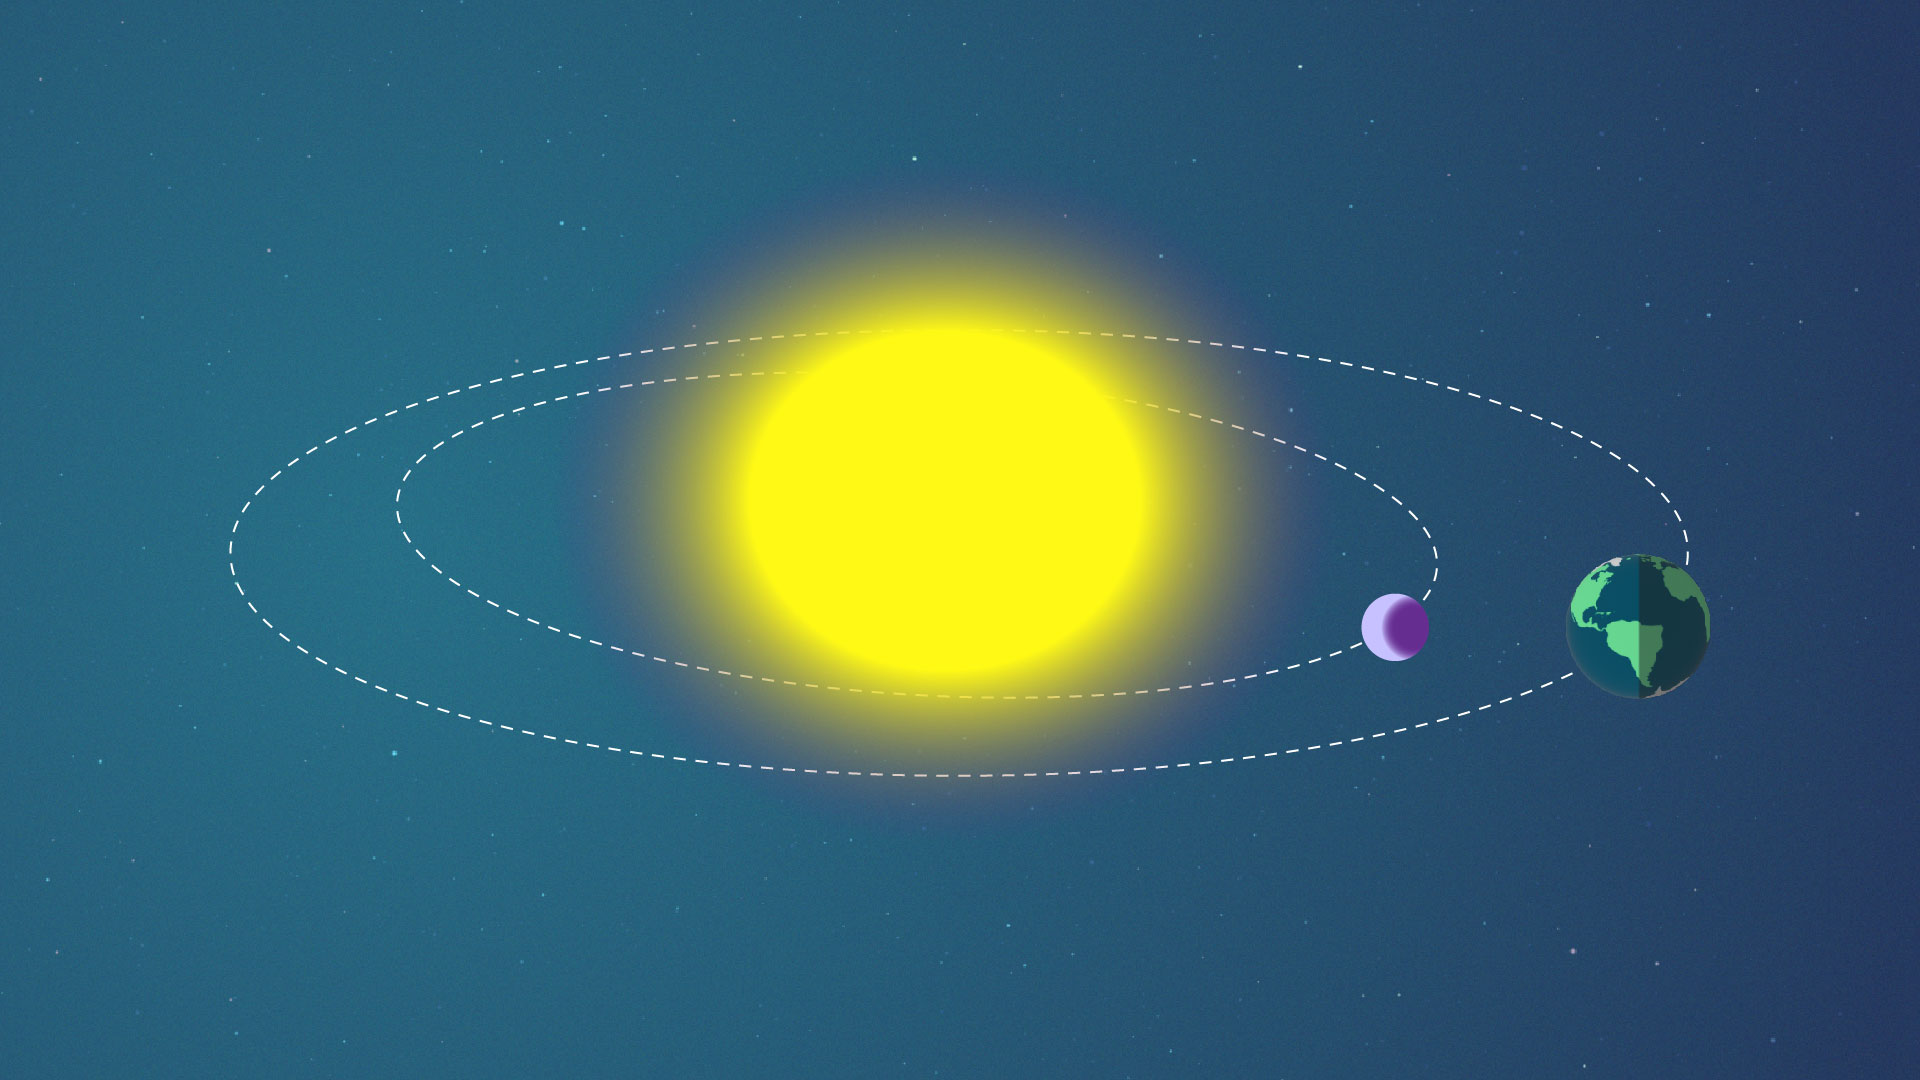 During a transit, a planet passes in between us and the star it orbits. This method is commonly used to find new exoplanets.